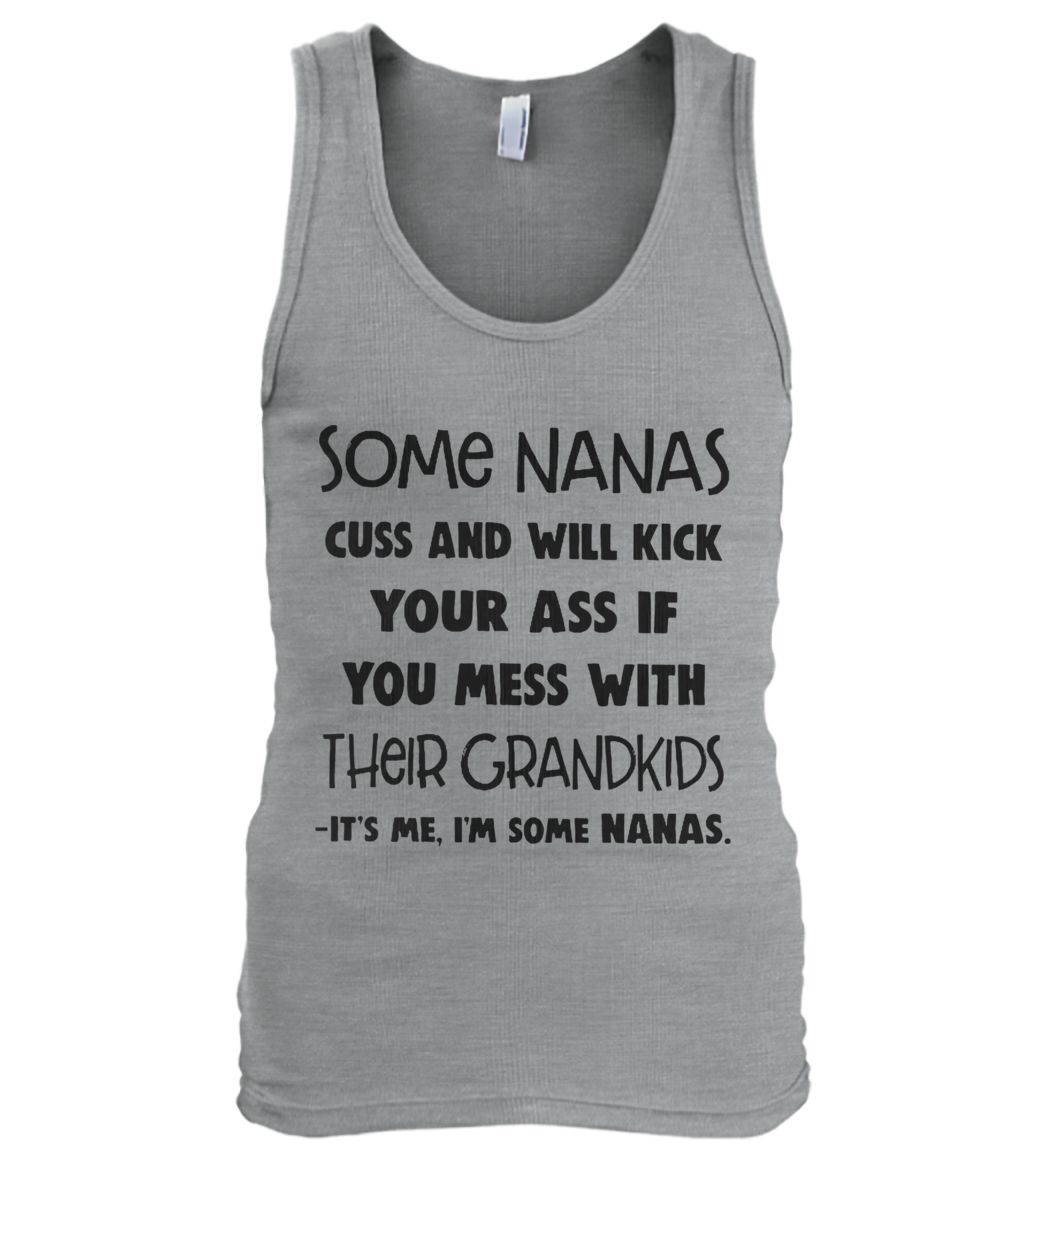 Some nanas cuss and will kick your ass if you mess with their grandkids men's tank top